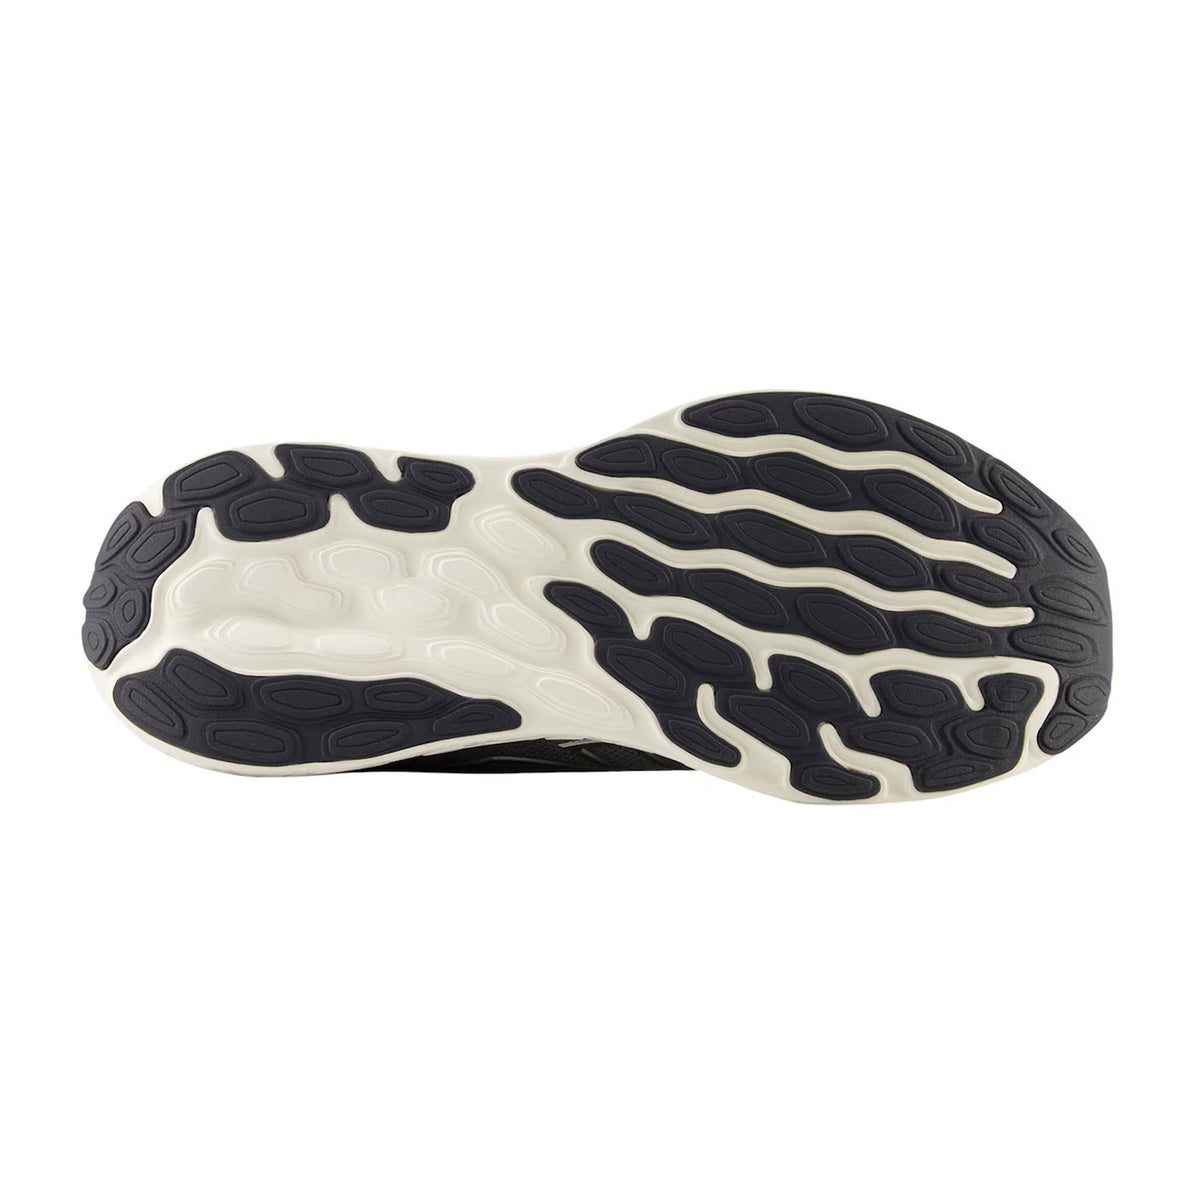 Sole of a New Balance 680v8 athletic shoe, featuring a black and white wave-patterned tread design, isolated on a white background.